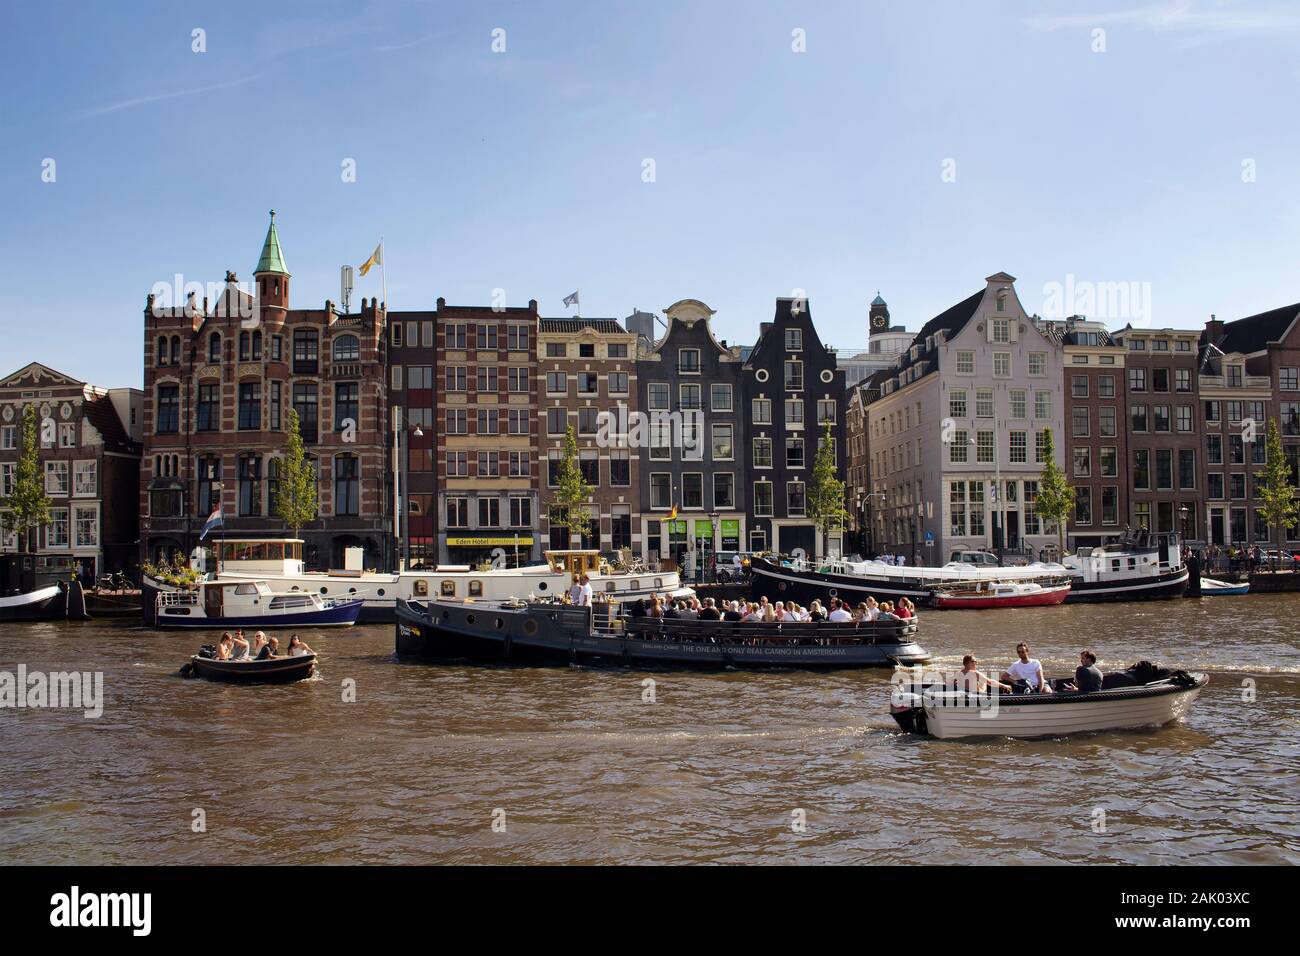 View of people riding open boats in Amstel river doing canal cruise tours. Historical, traditional and typical buildings are in the background. It is Stock Photo